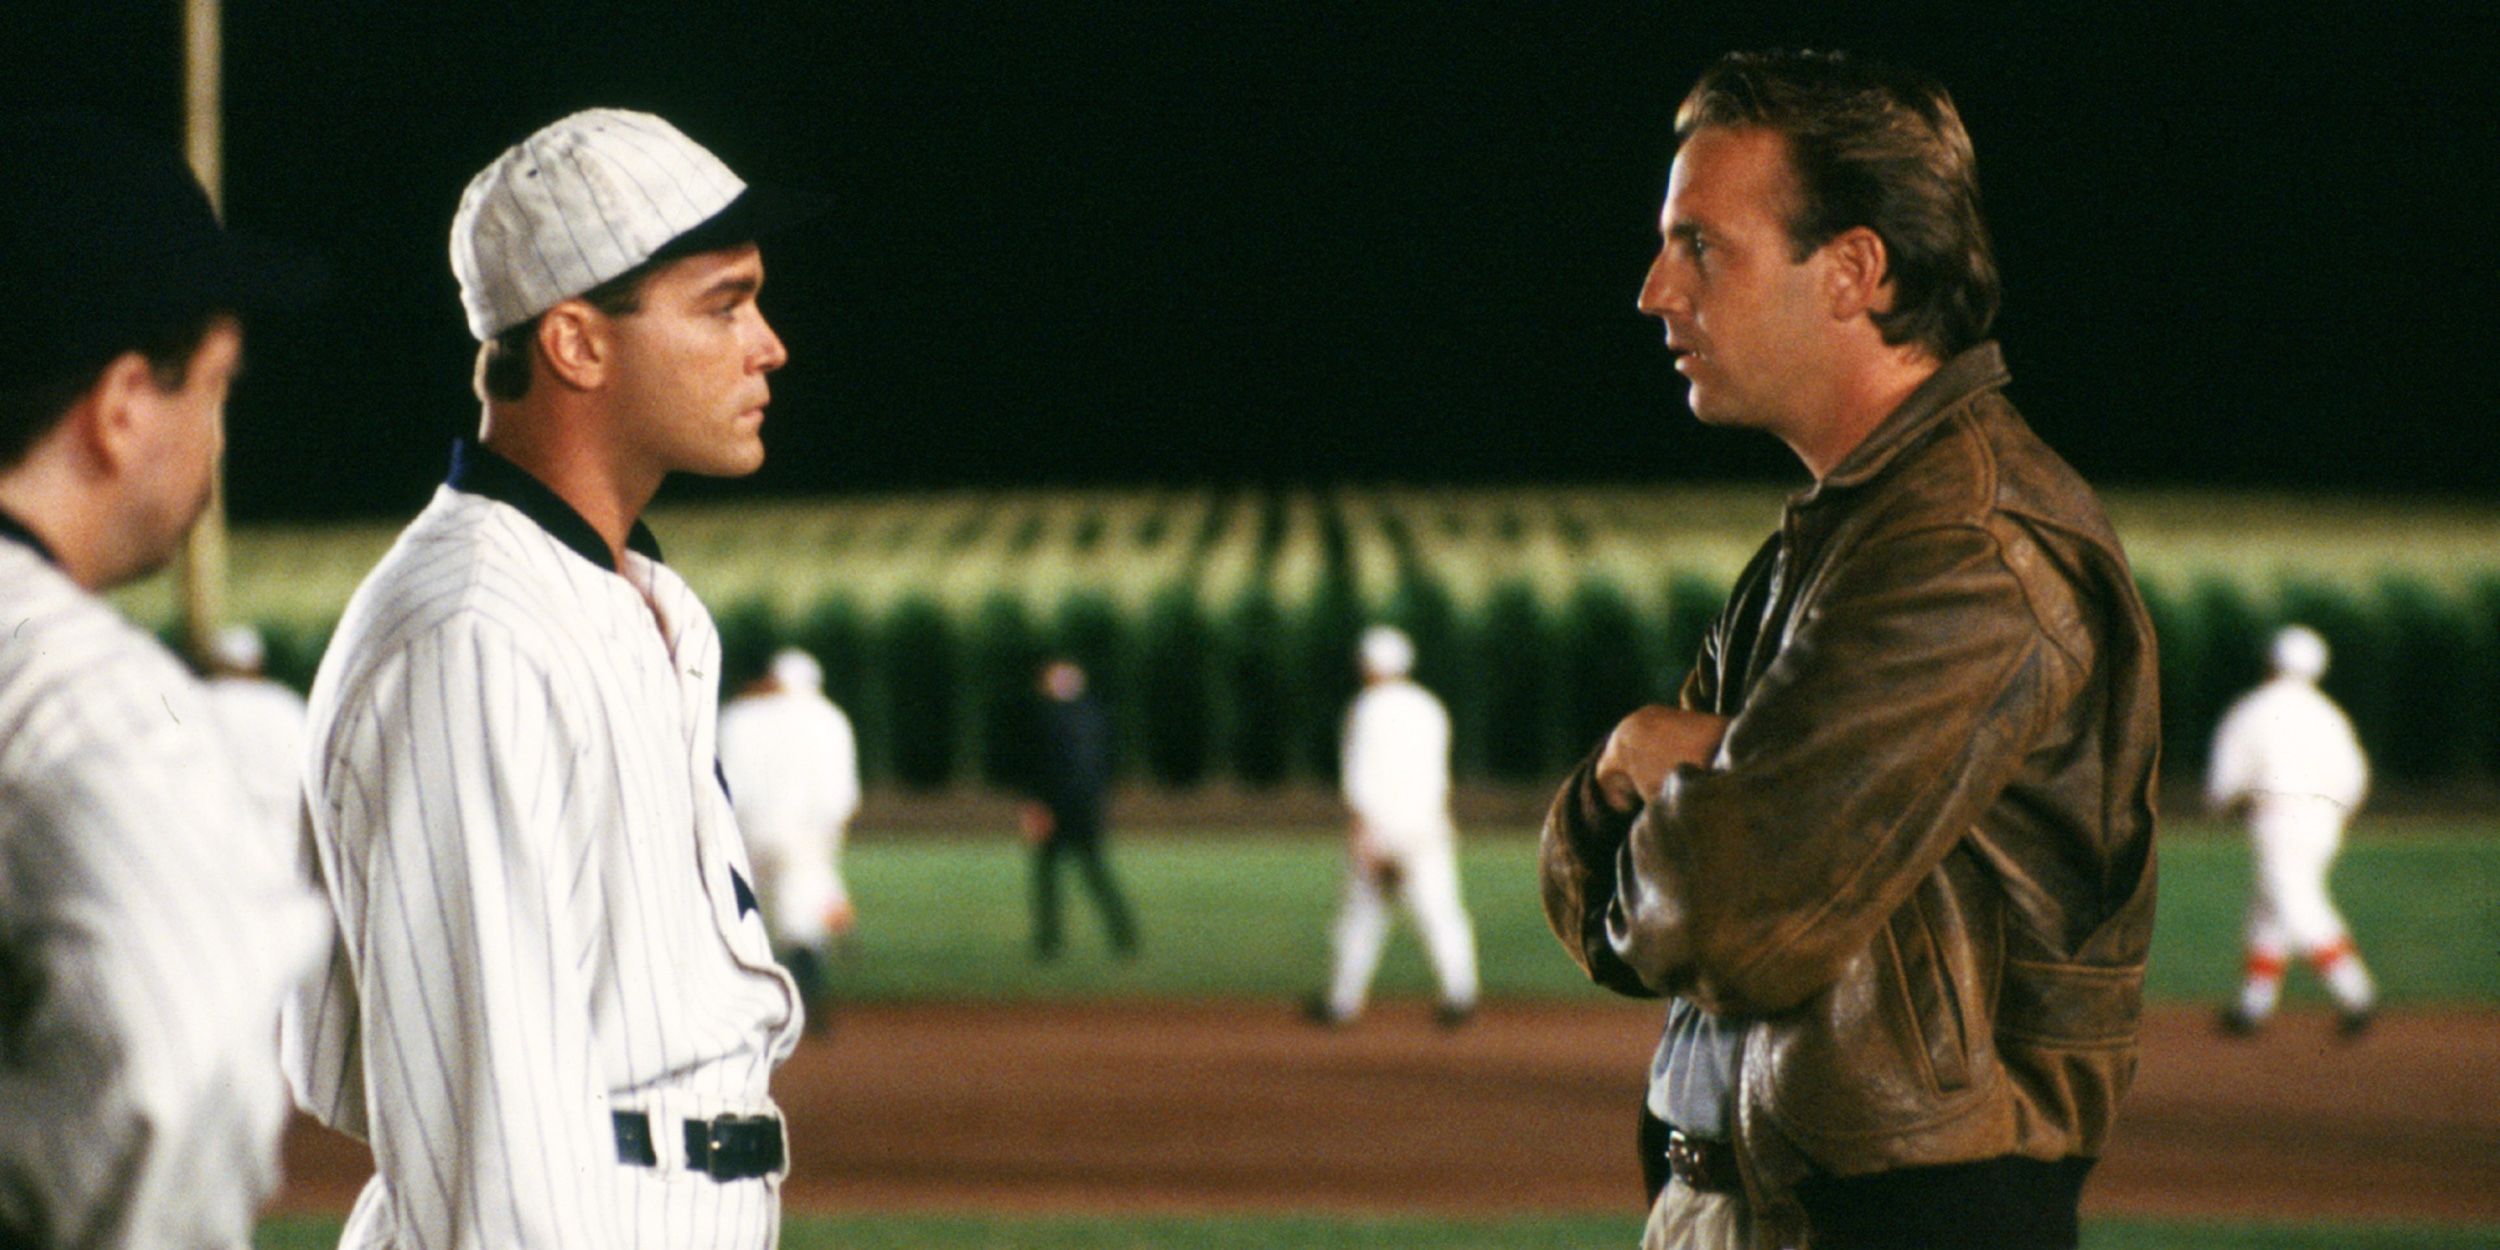 Ray Liotta and Kevin Costner in Field of Dreams